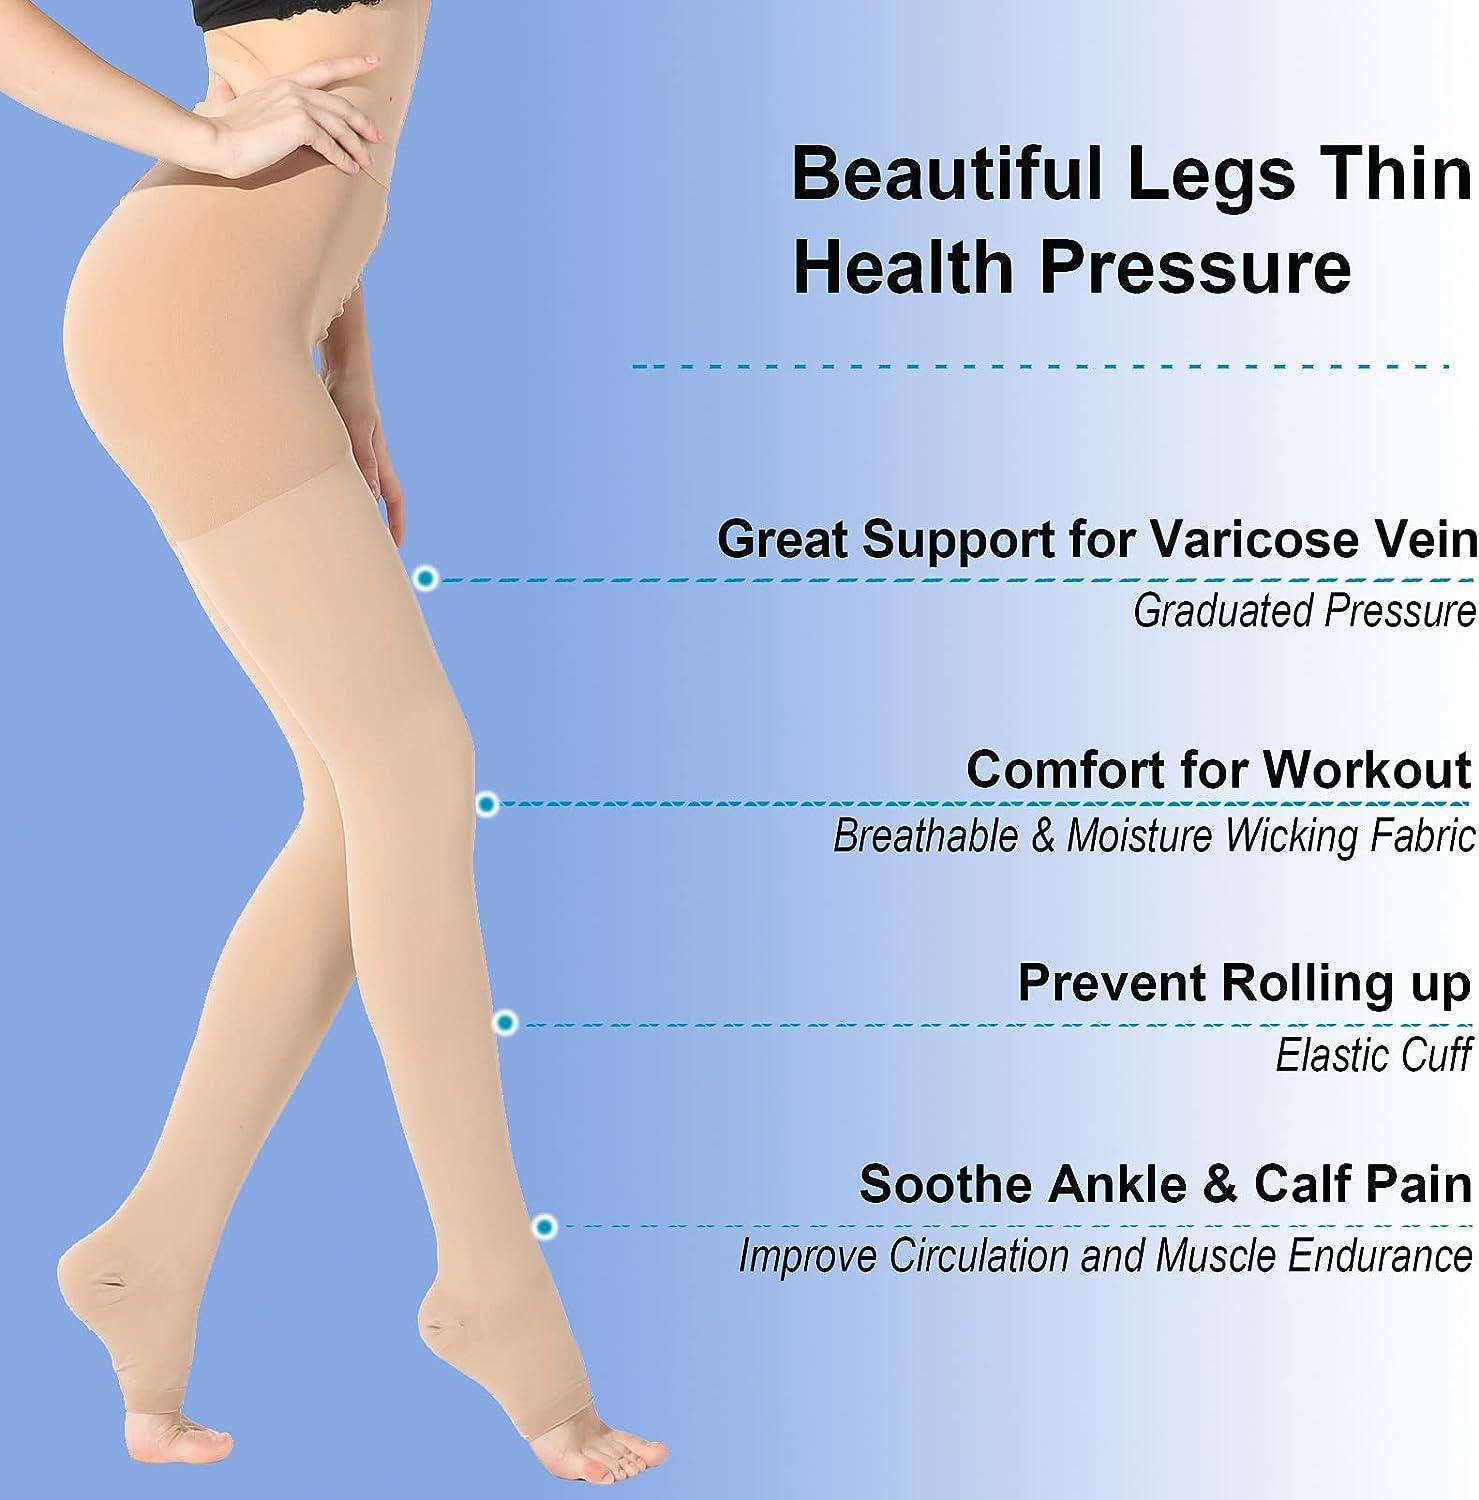 Medical Compression Leggings for Women 20-30 mmhg Compression Pantyhose,  Medical Compression Tights for Varicose Veins, Swelling